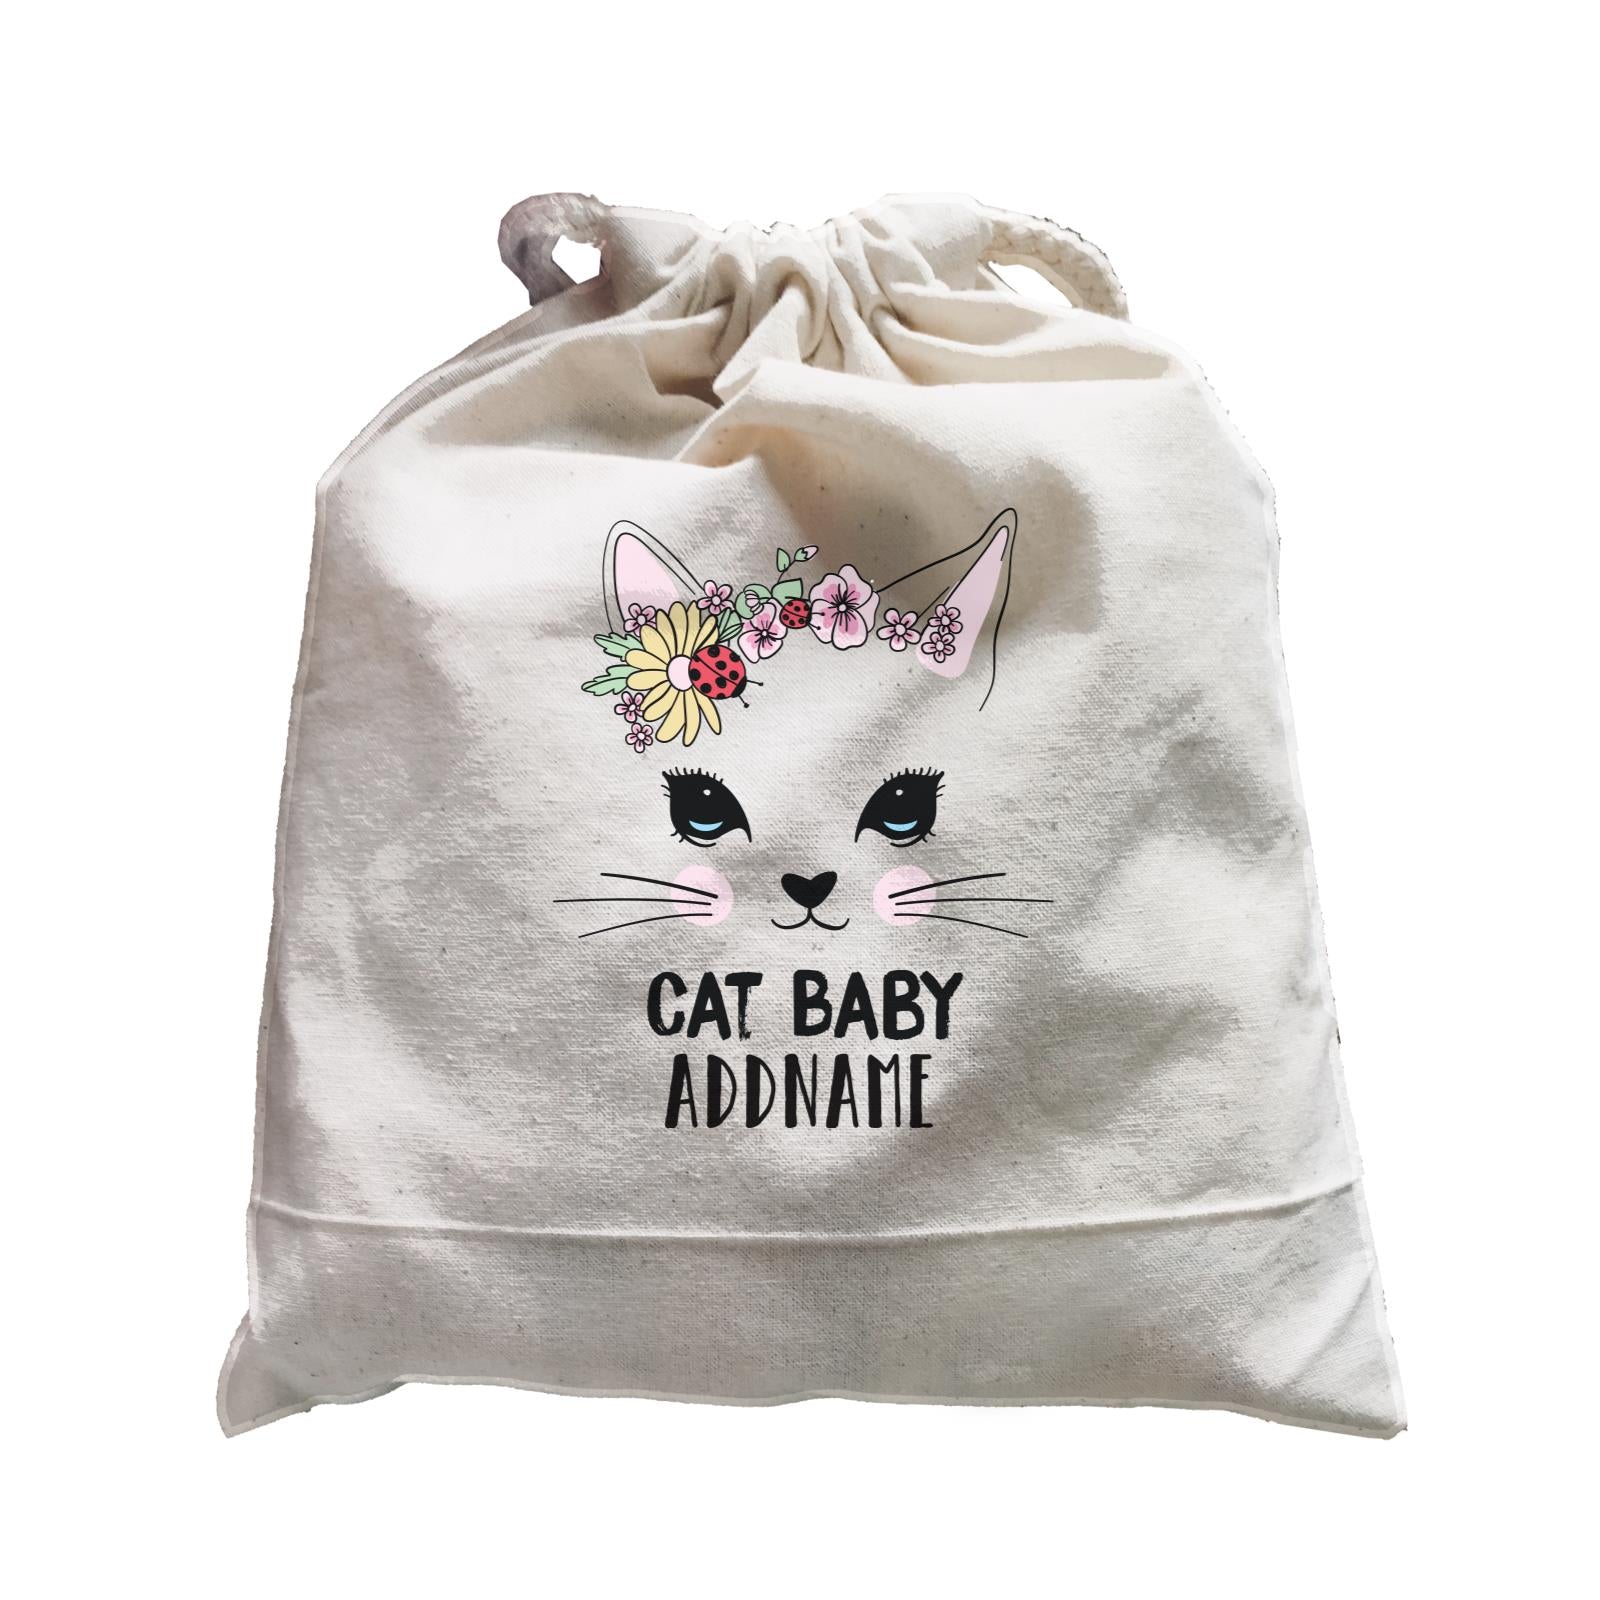 Cool Vibrant Series Cat Baby Addname Satchel